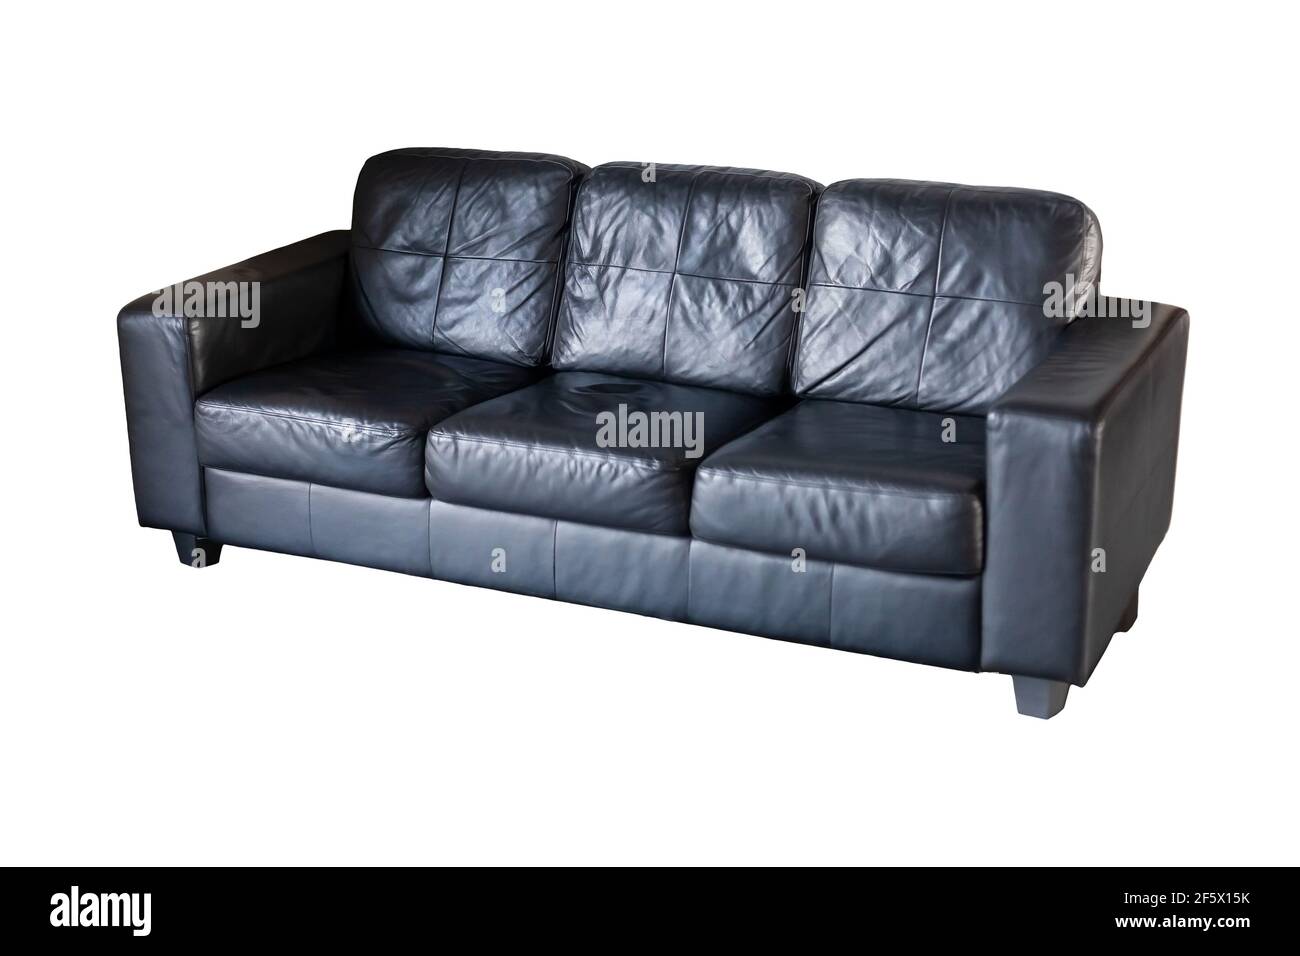 Casting couch Cut Out Stock Images & Pictures - Alamy